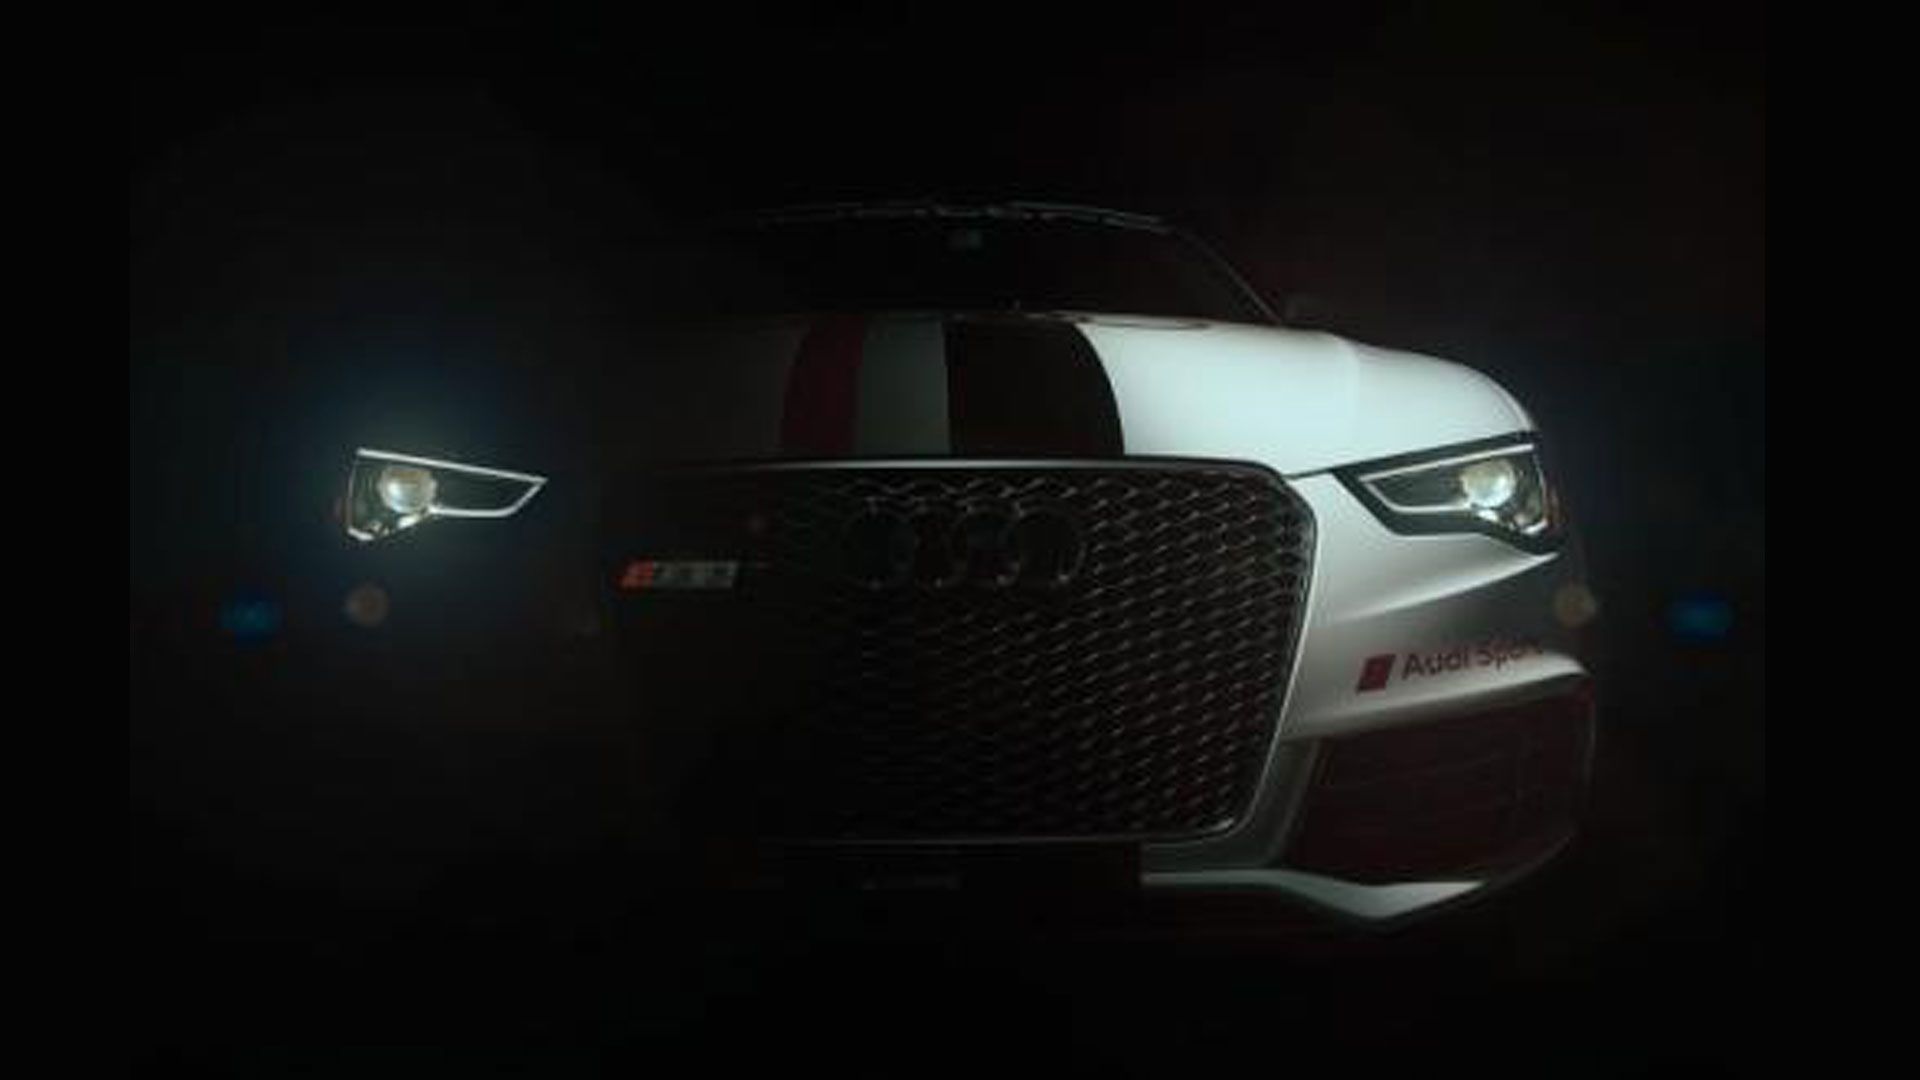 Audi Wallpaper Background In HD For Free Download